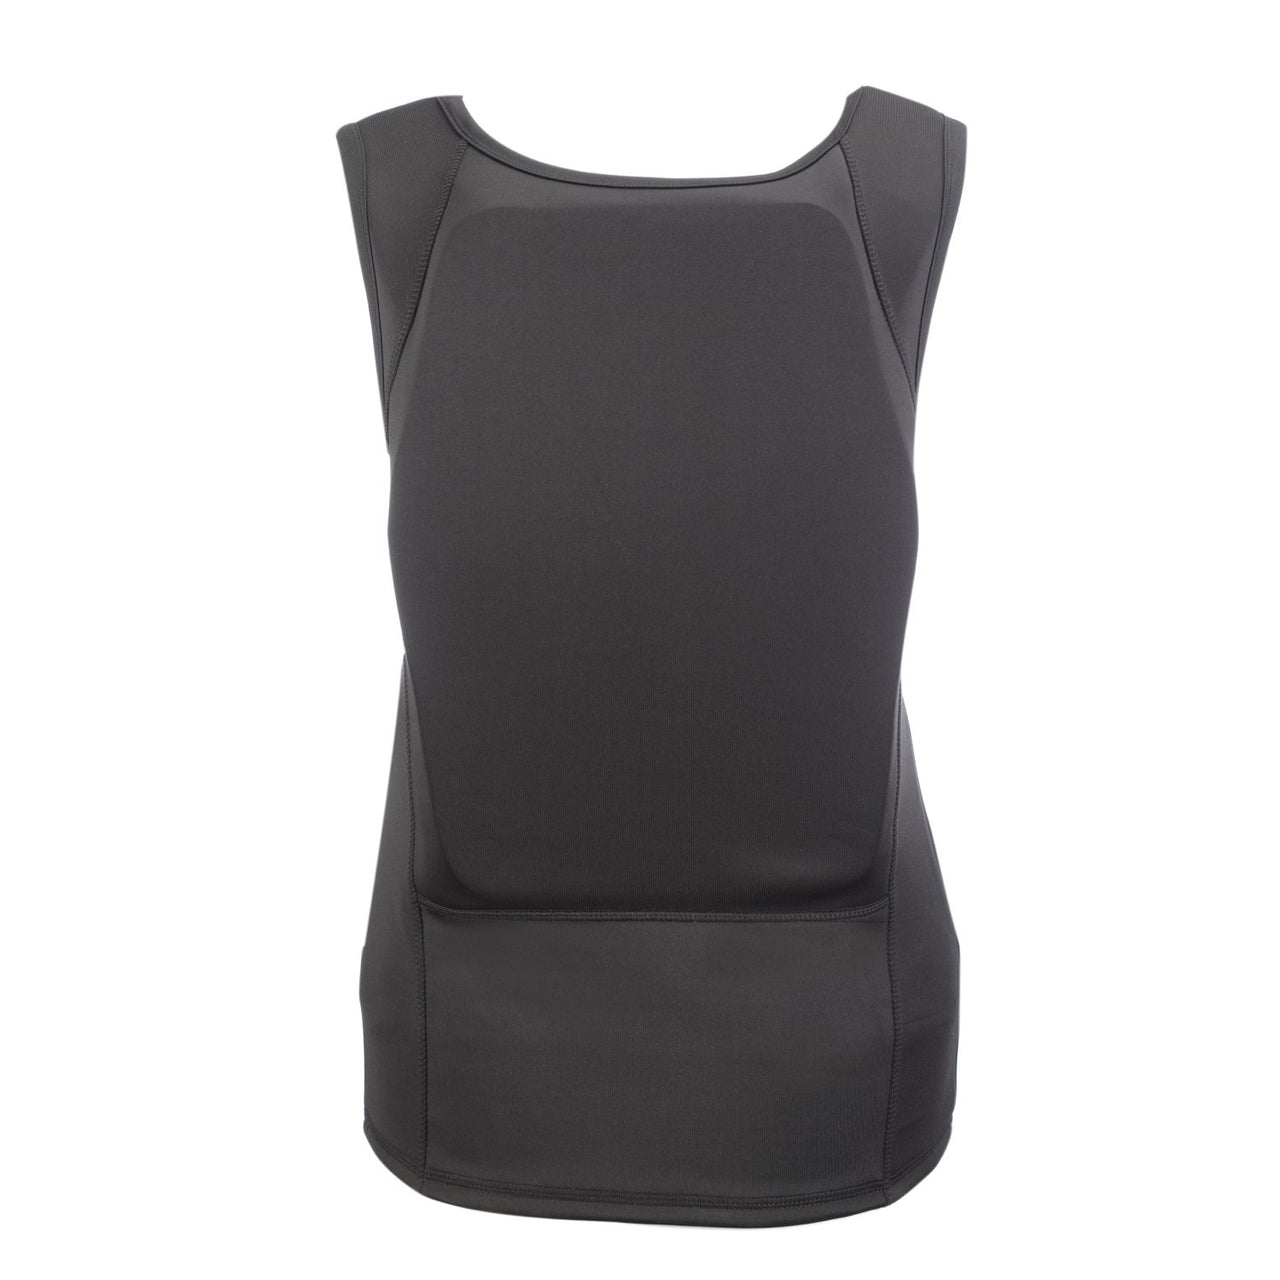 The back view of a women's Body Armor Direct Concealable Express T-Shirt Carrier.